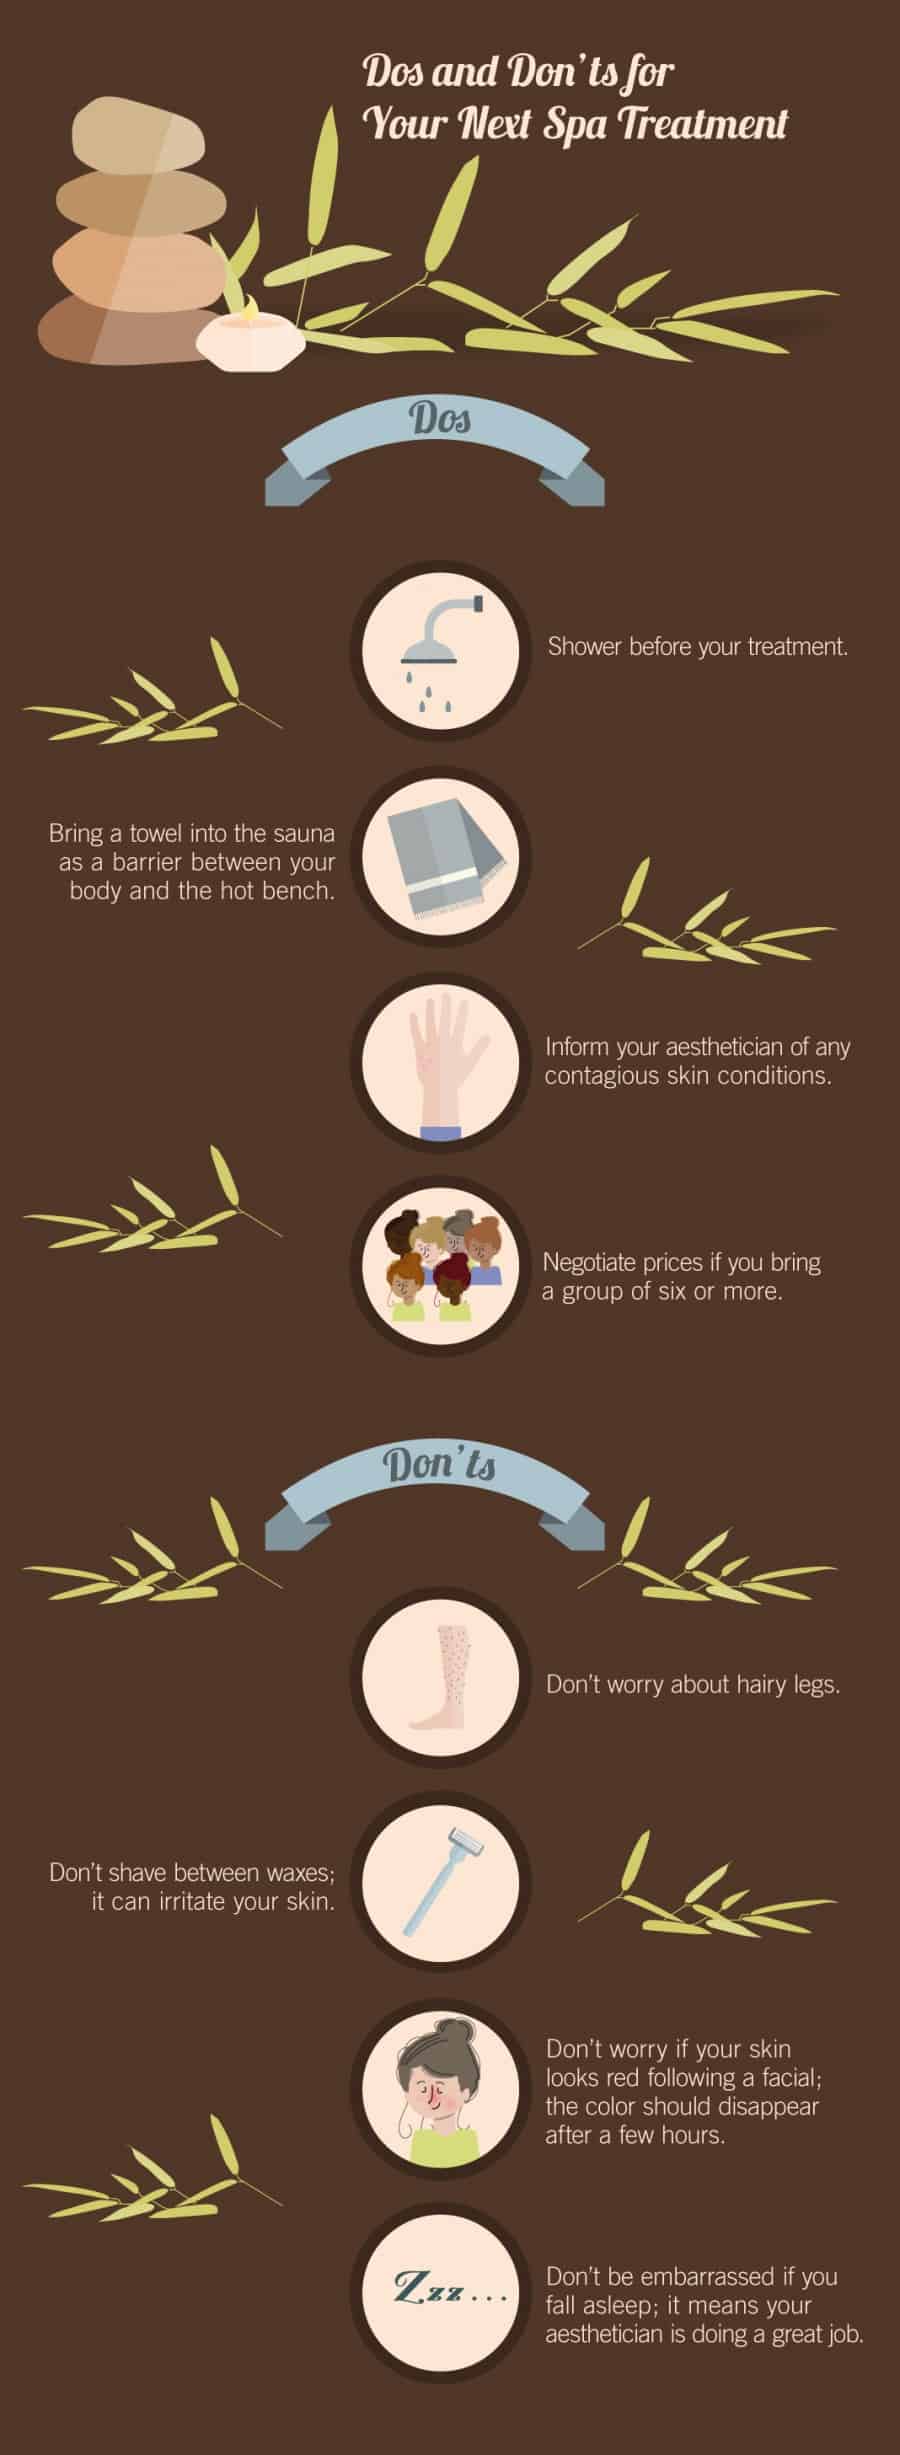 Mind Your Manners: Spa Etiquette for a Relaxing, Comfortable Experience Infographic